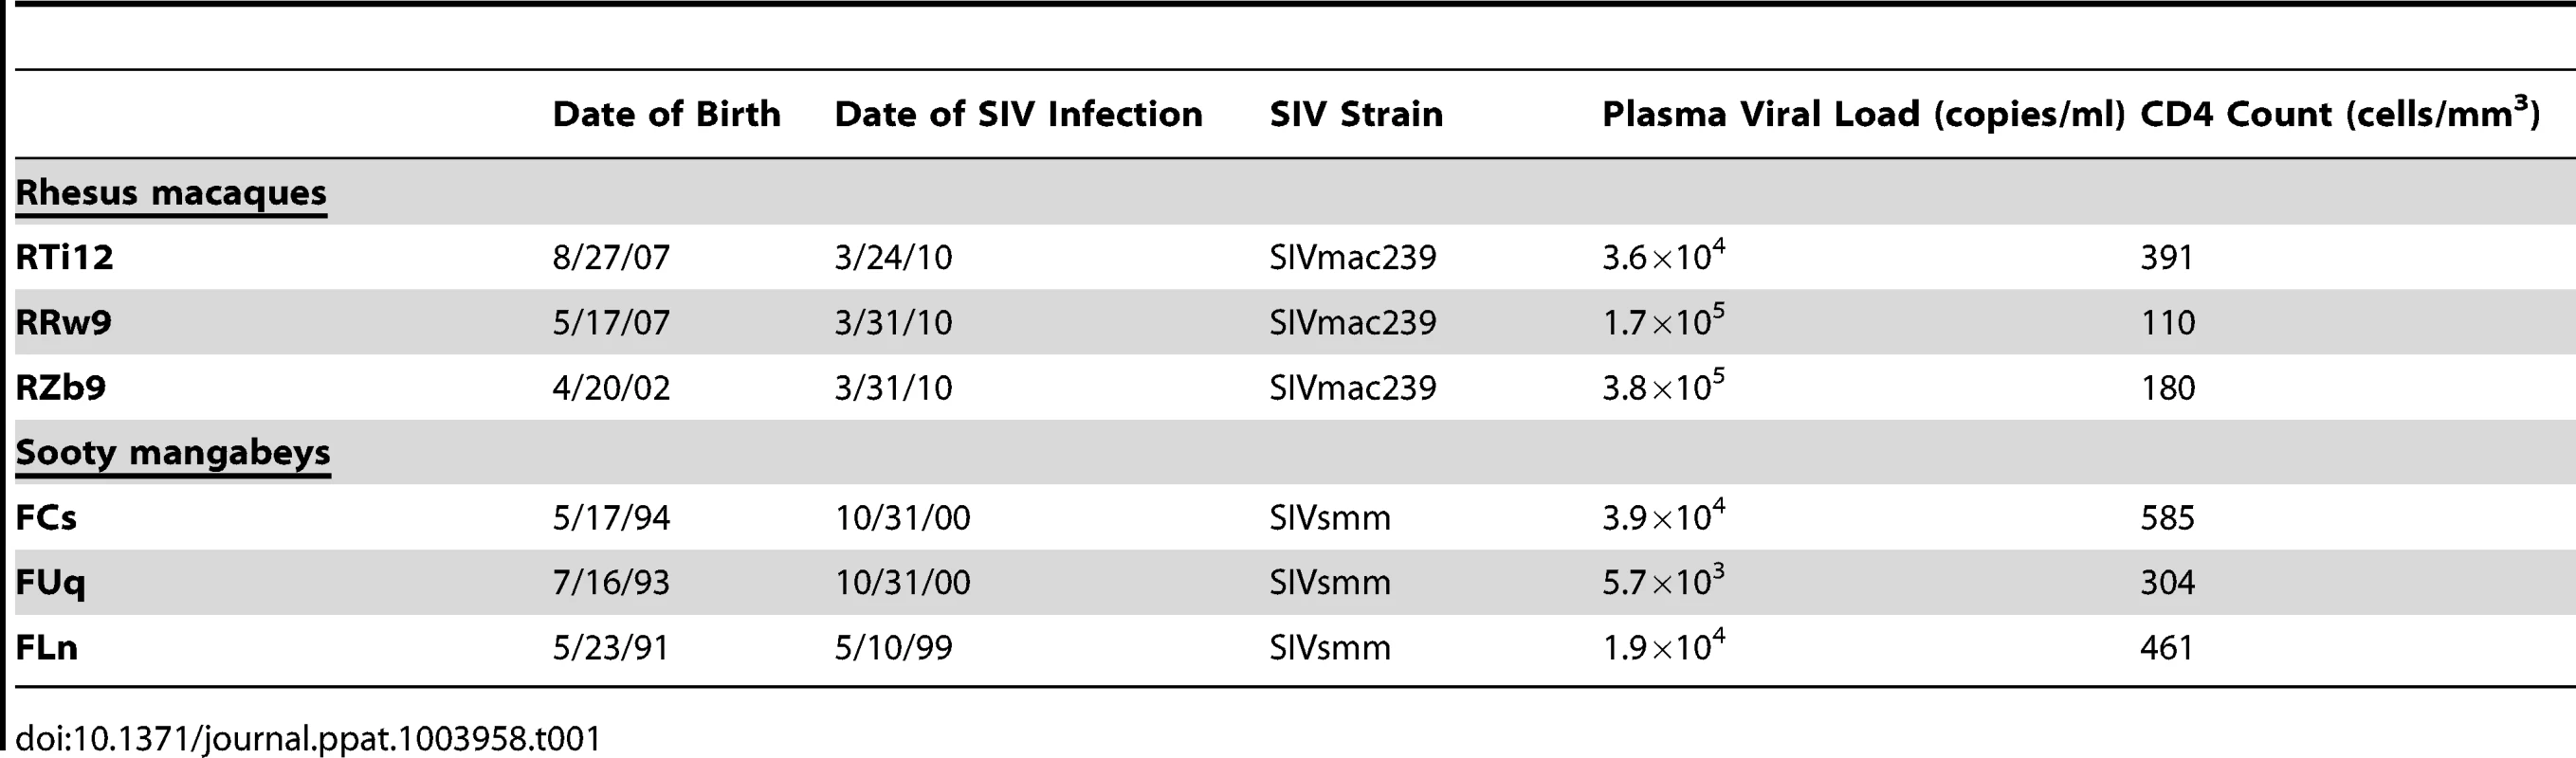 Clinical characteristics of chronically SIV-infected, female nonhuman primates.